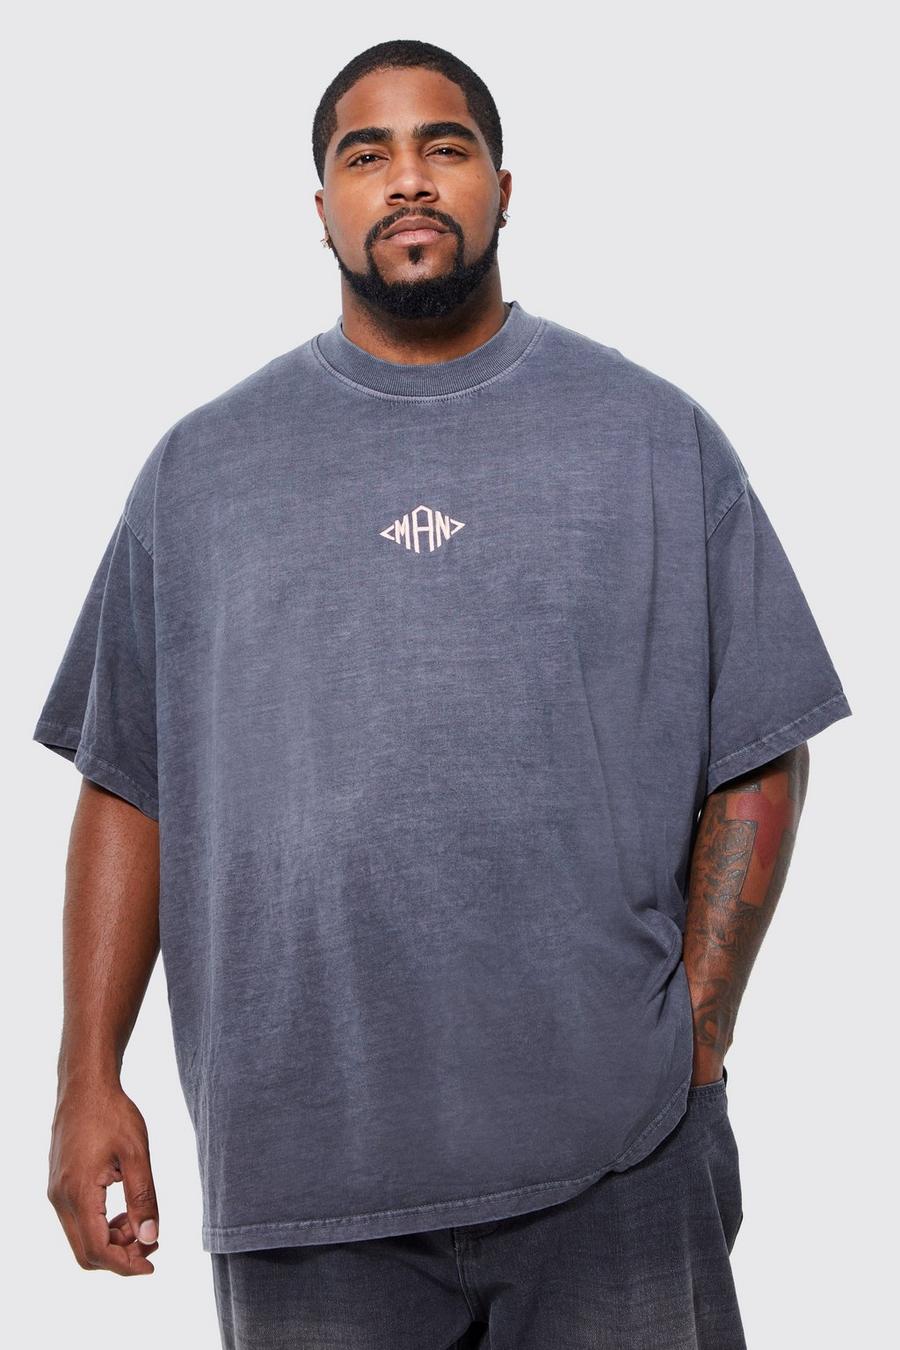 Plus Oversize Man T-Shirt, Charcoal image number 1